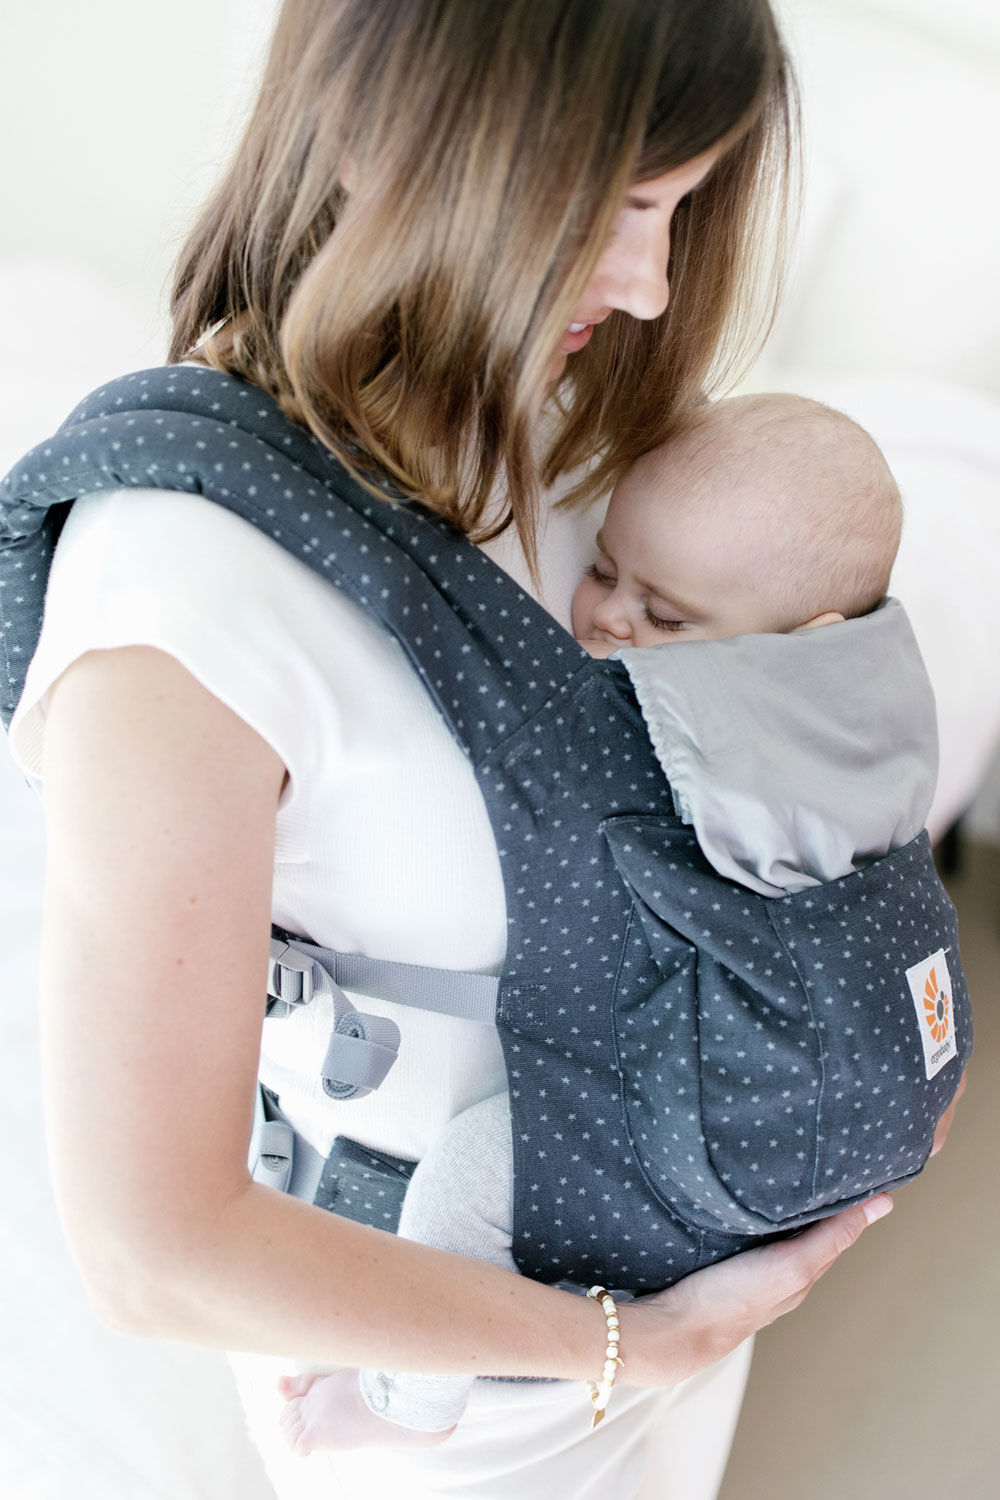 baby carrier multi position